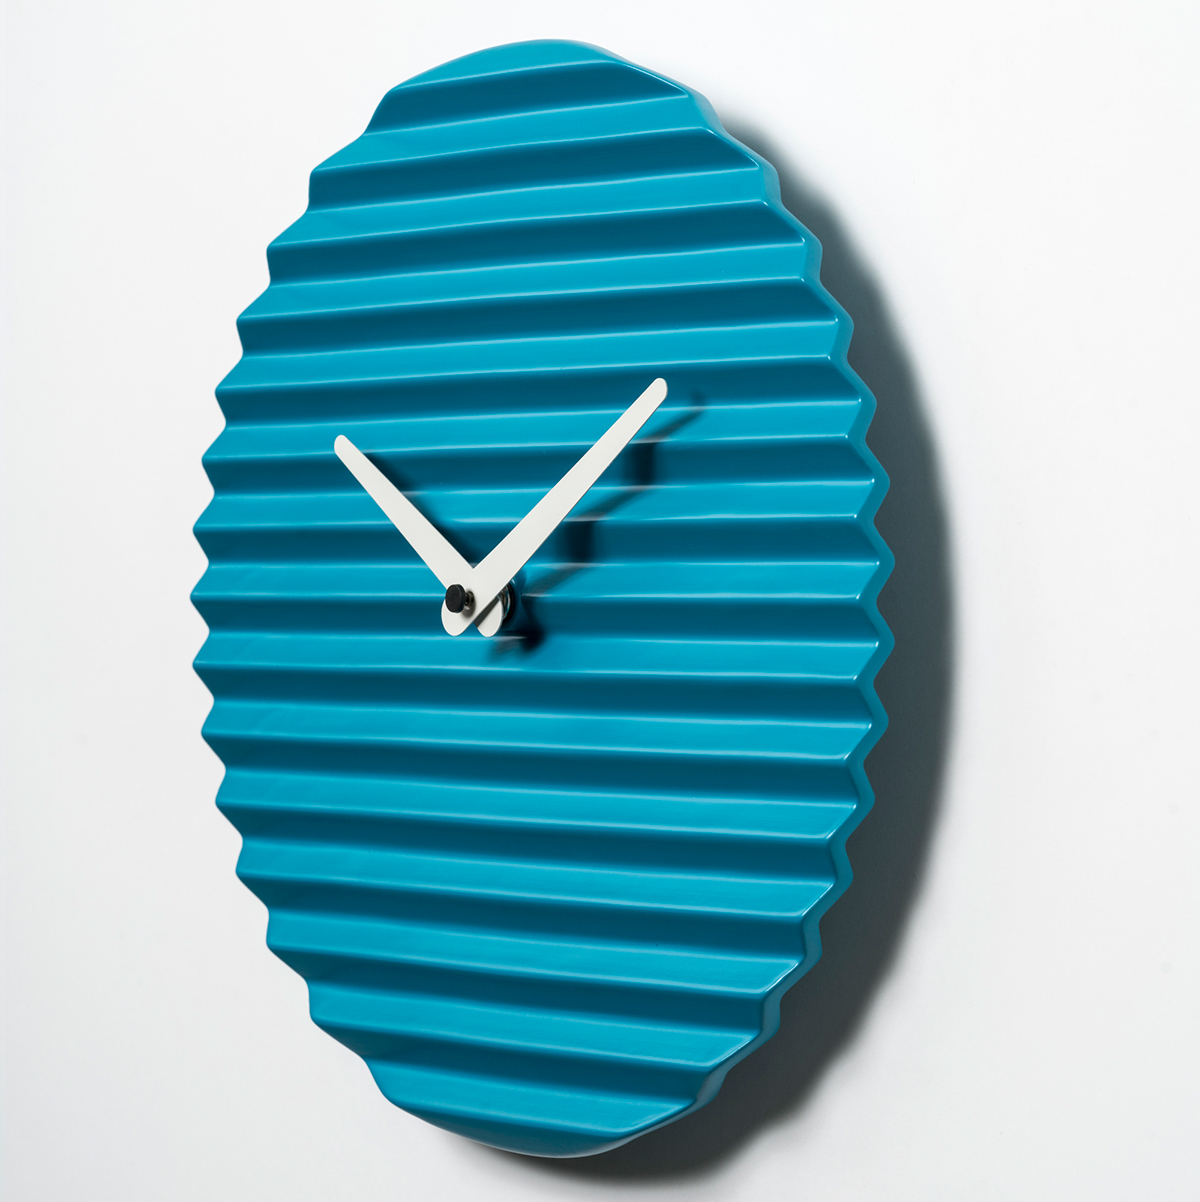 wall clock clock design product desig Made in Italy ceramic orologio black White product cool Beautiful graphic minimal